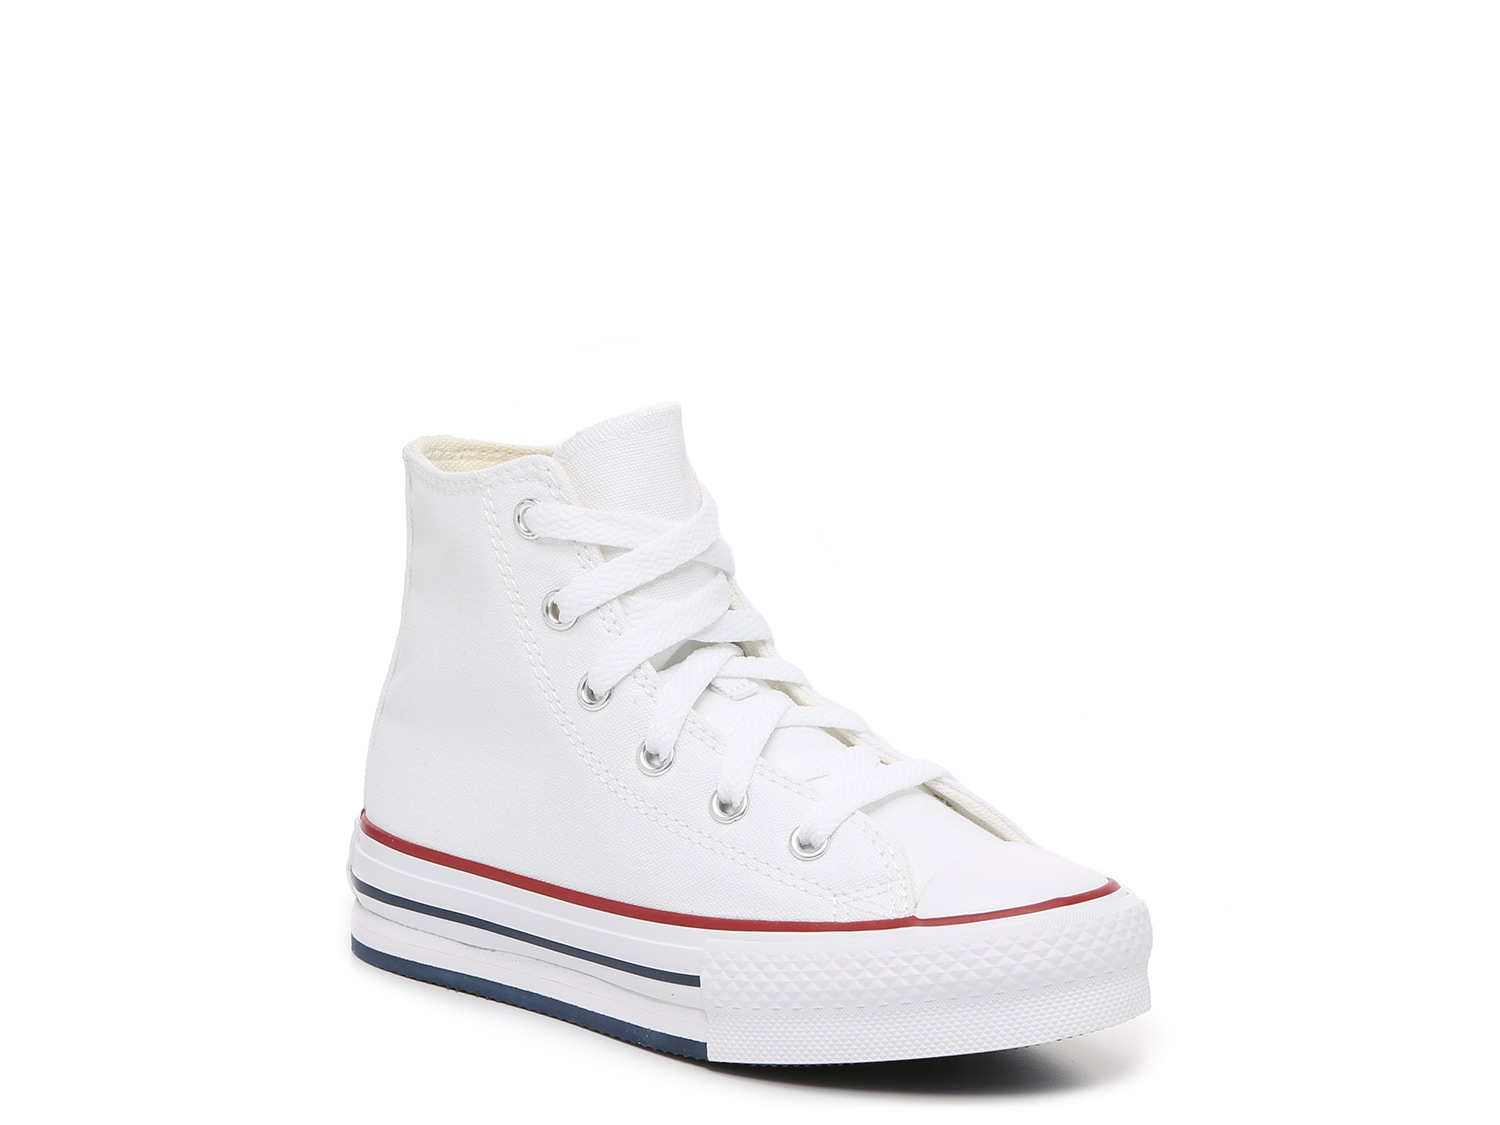 Converse Shoes High Top Low Top Sneakers Chuck Taylors Dsw